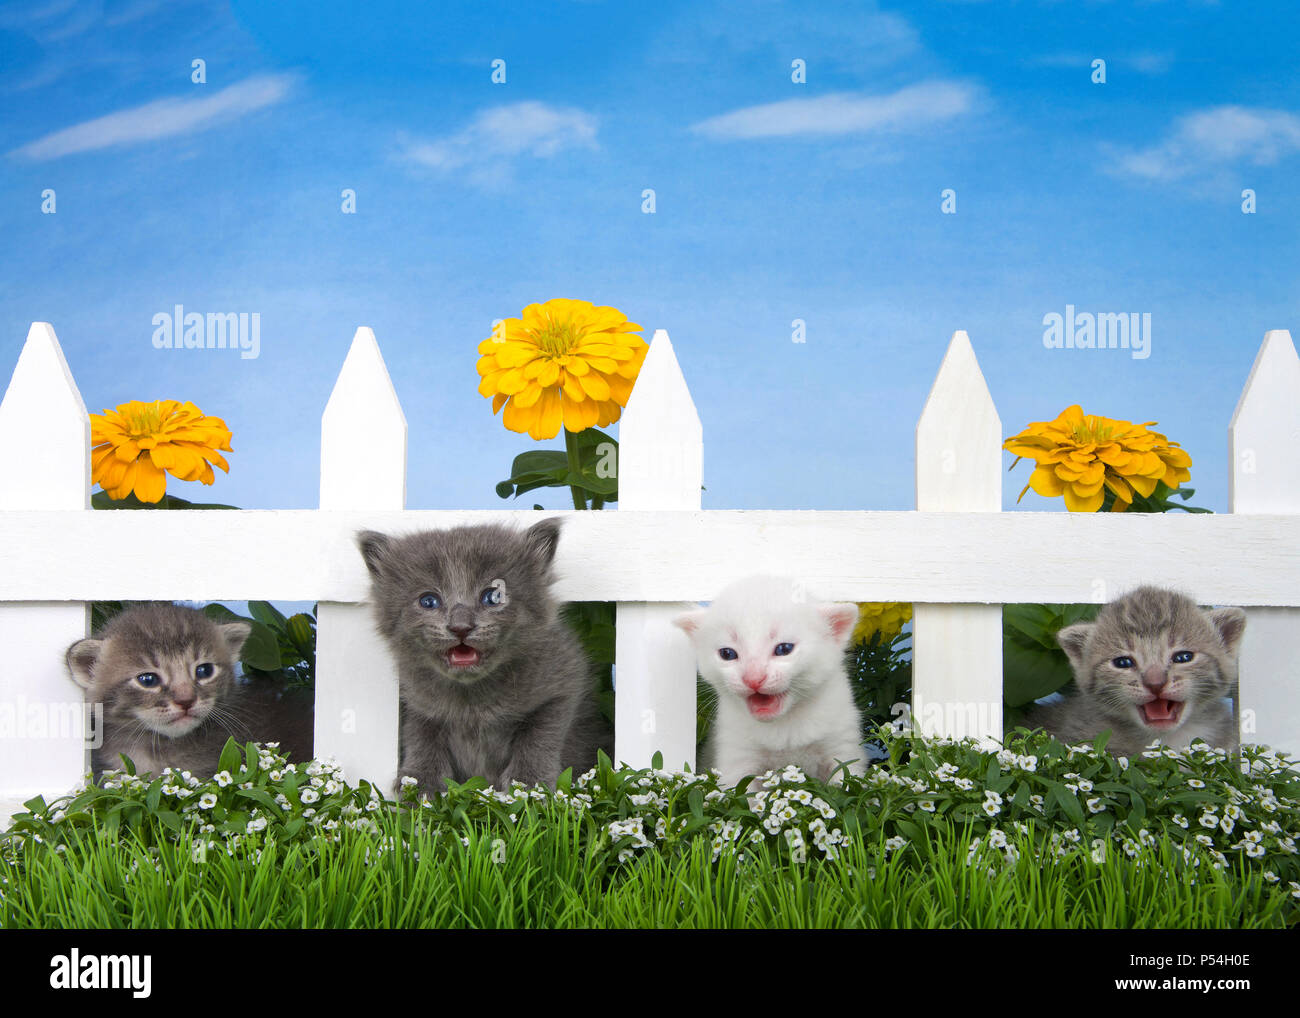 Close up of four tiny kittens peaking through a wood picket fence with white alyssum and grass in foreground, golden yellow marigolds behind fence, sk Stock Photo